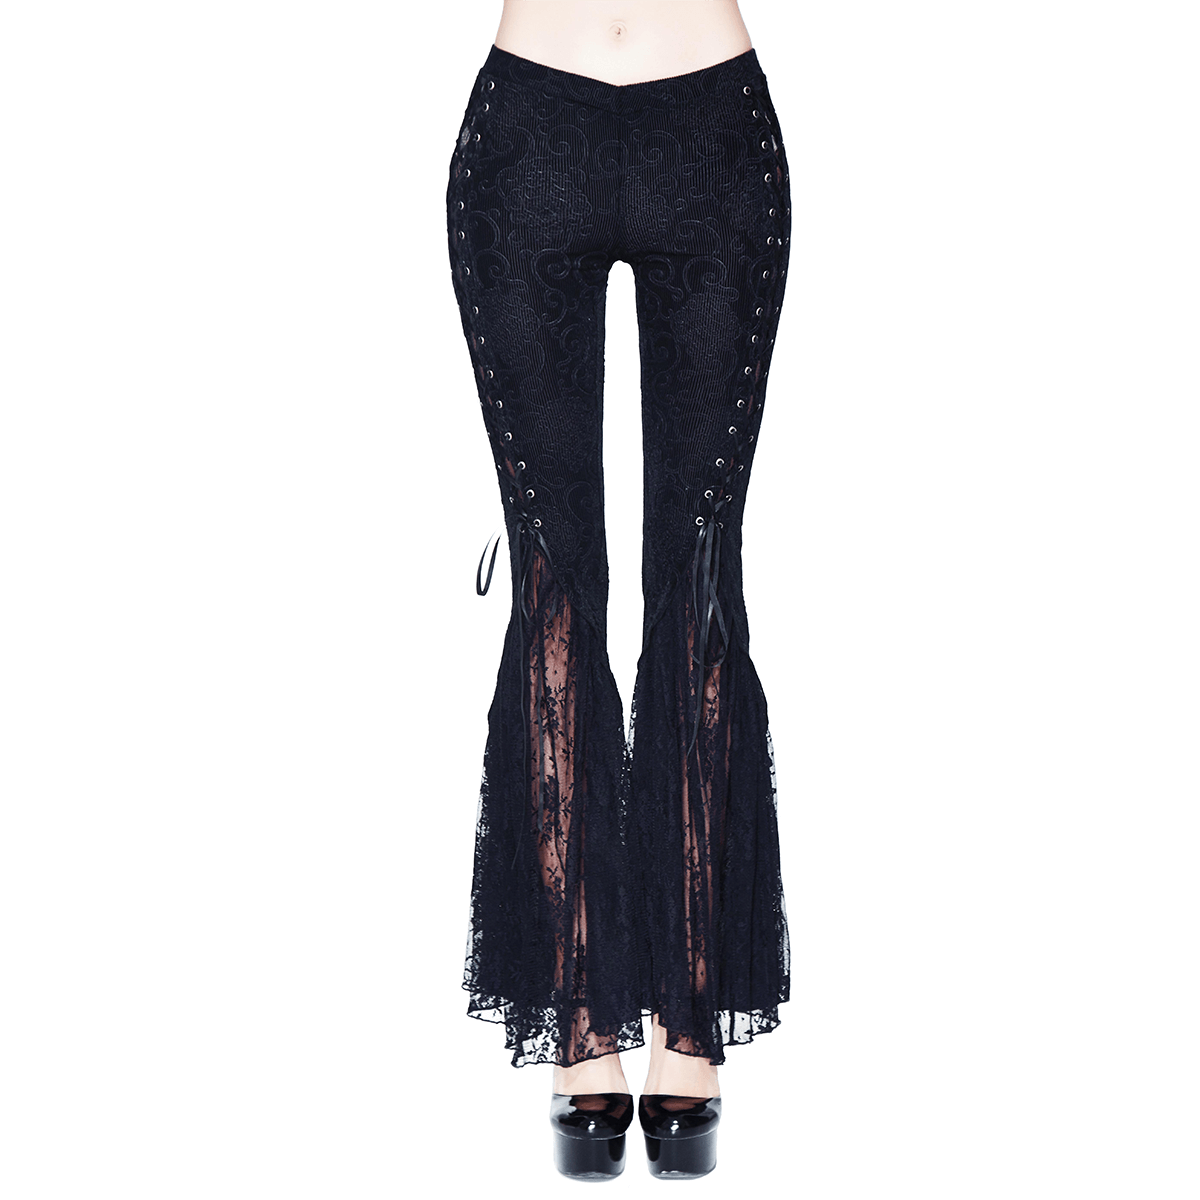 See Flare Pants Women, See Sexy Flare Pants, Transparent Flare Pants